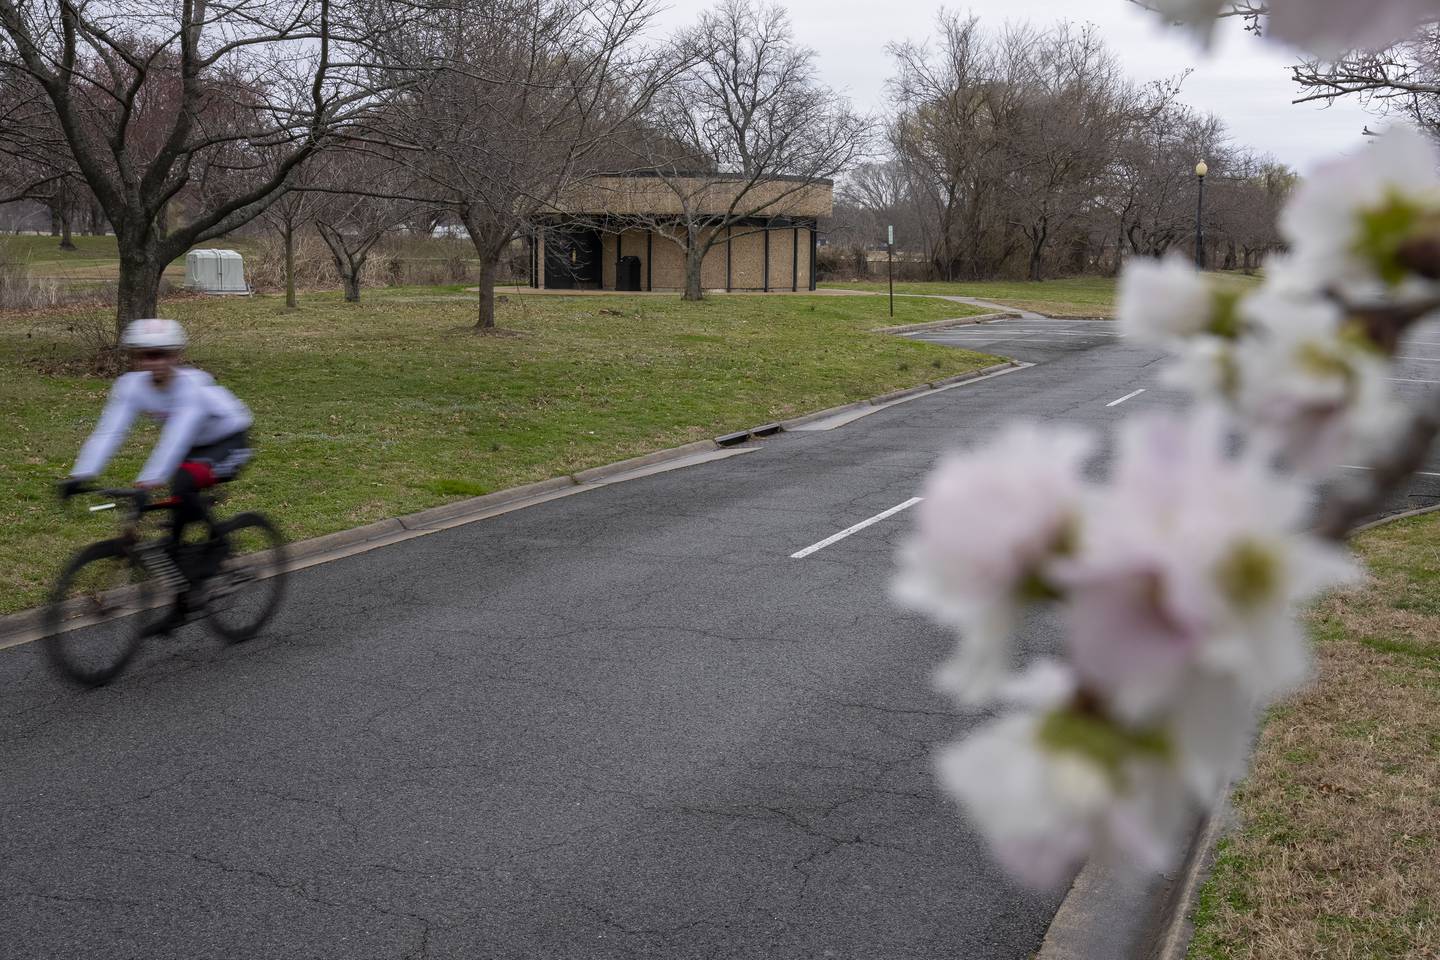 Cherry blossoms are visible along Hains Point in Washington, Monday, Feb. 27, 2023.